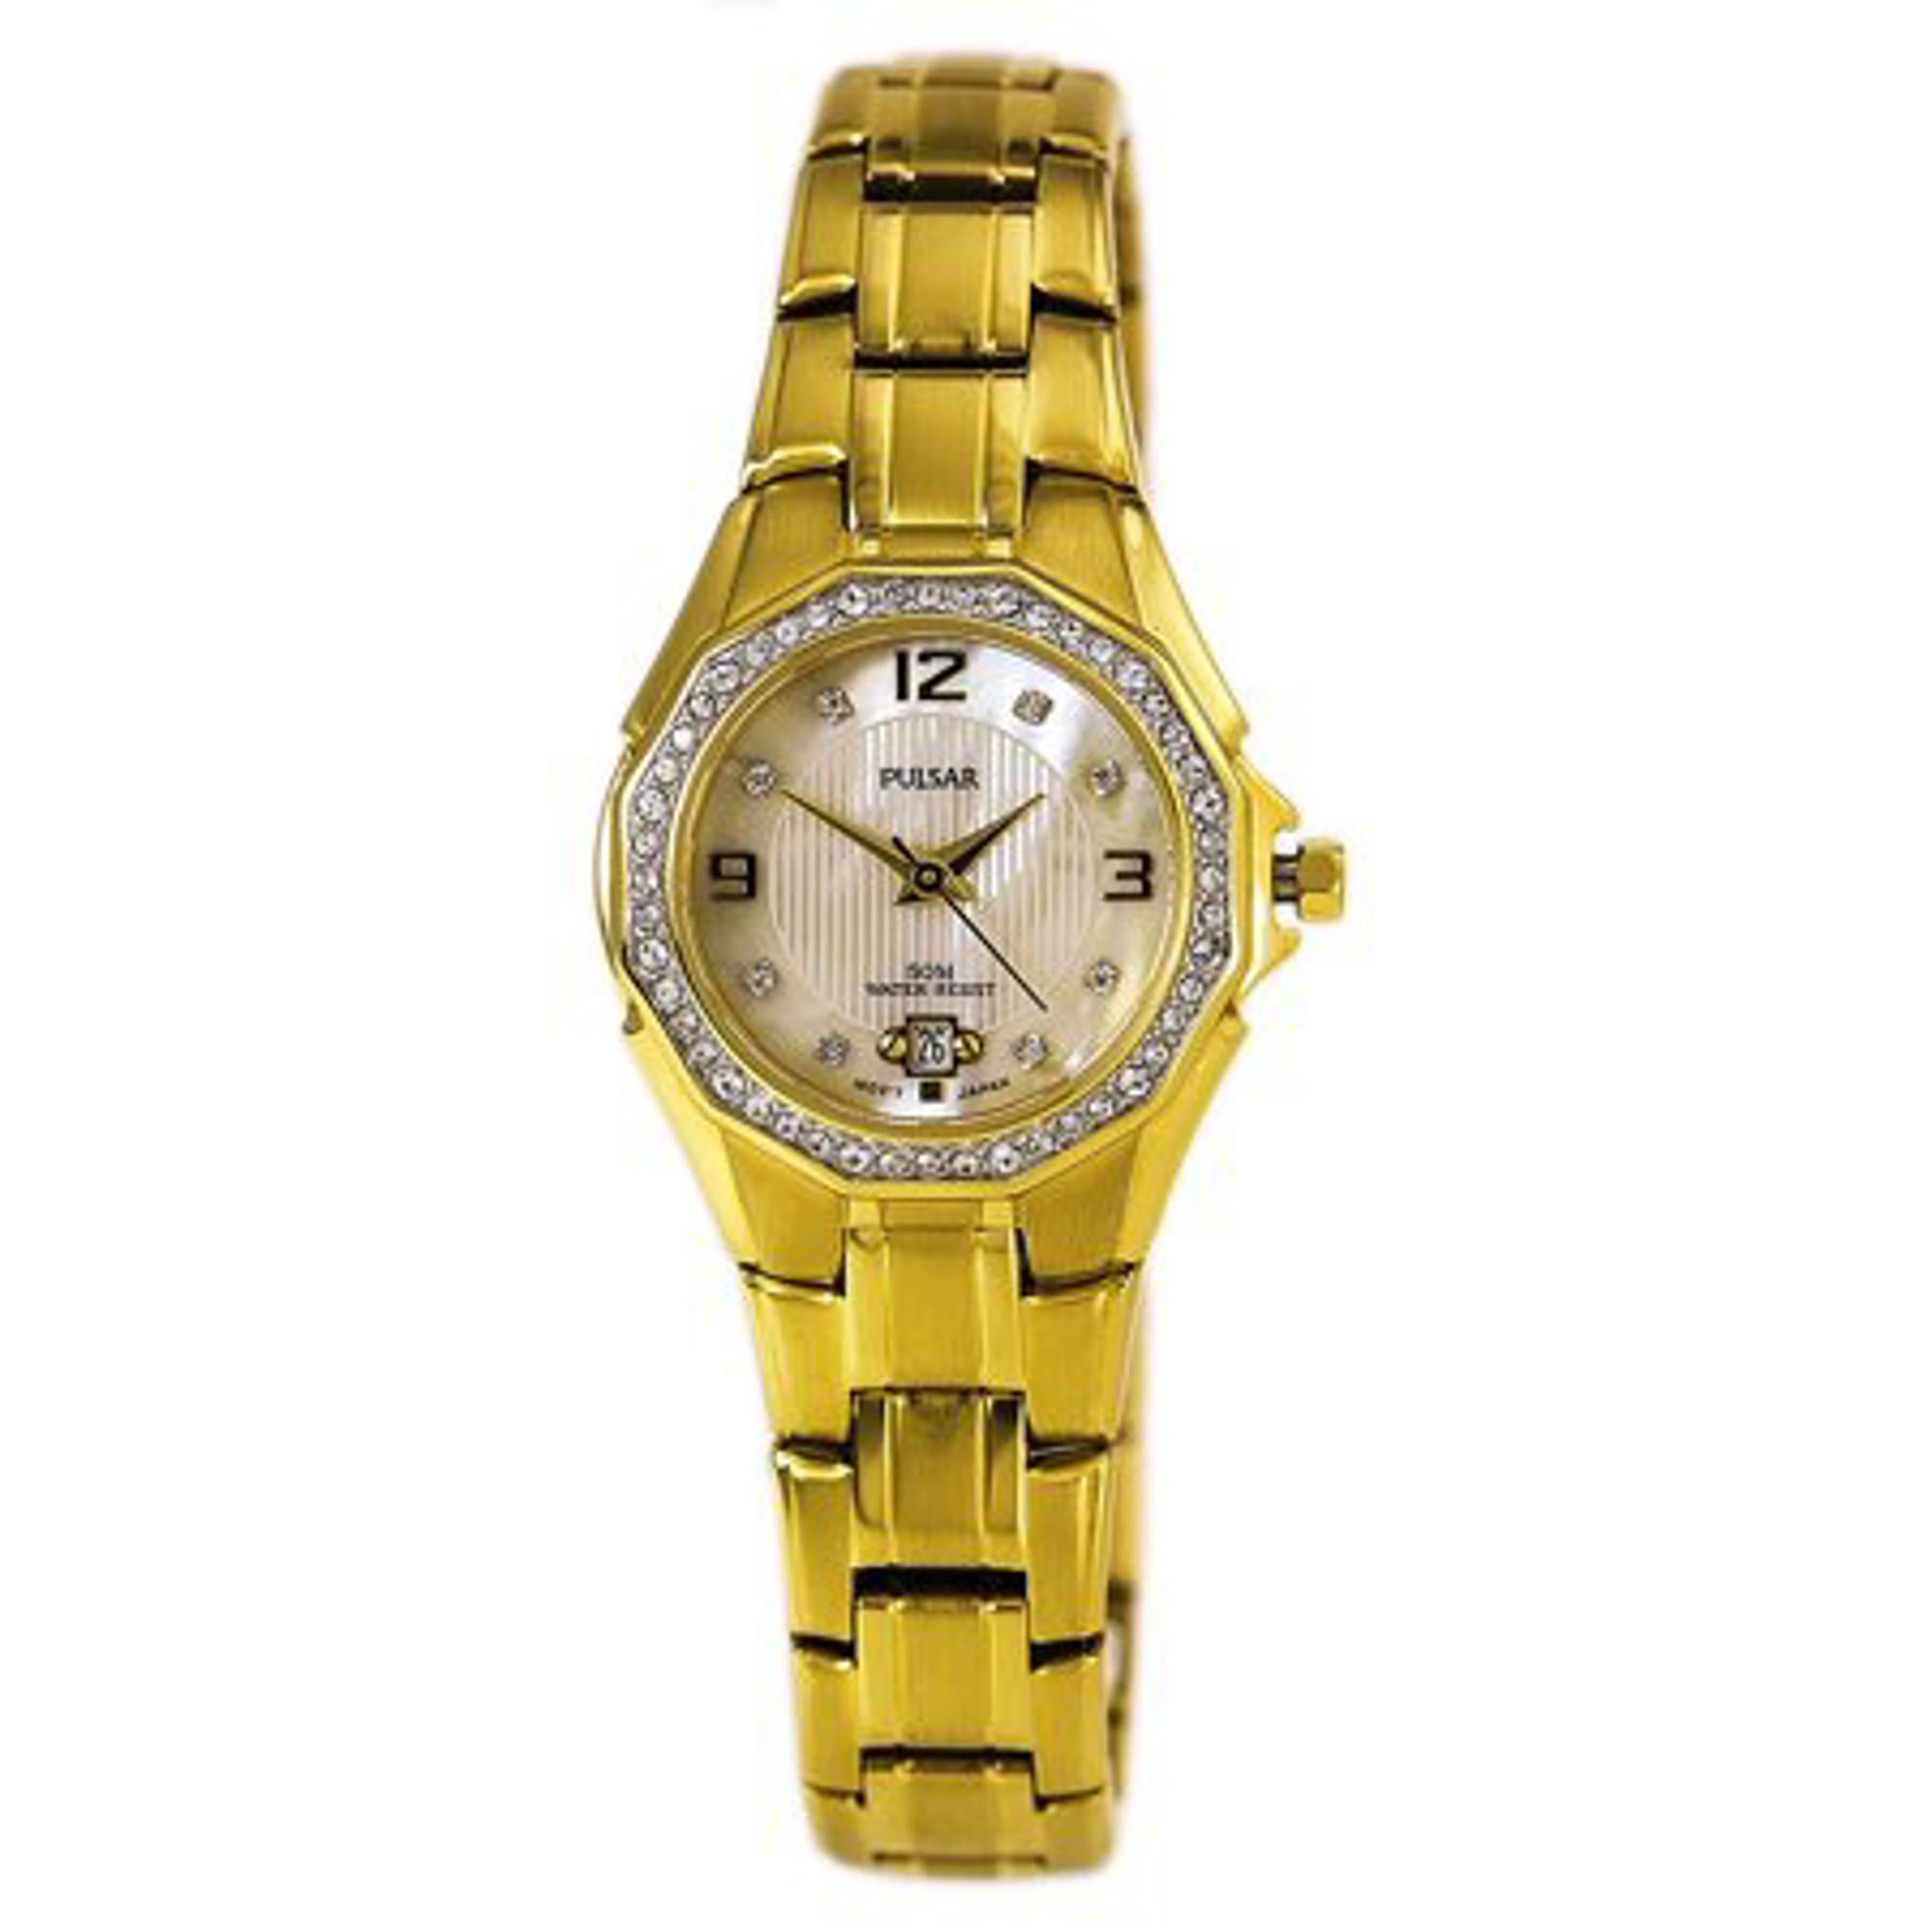 Pre-owned Pulsar Gold-Tone Stainless Steel Crystal MOP Dial Ladies Quartz Watch PXT800. The timepiece has a minor scratches and blemishes on the case and bracelet.  This Beautiful Timepiece is Powered By a Quartz (Battery) Movement and Features: